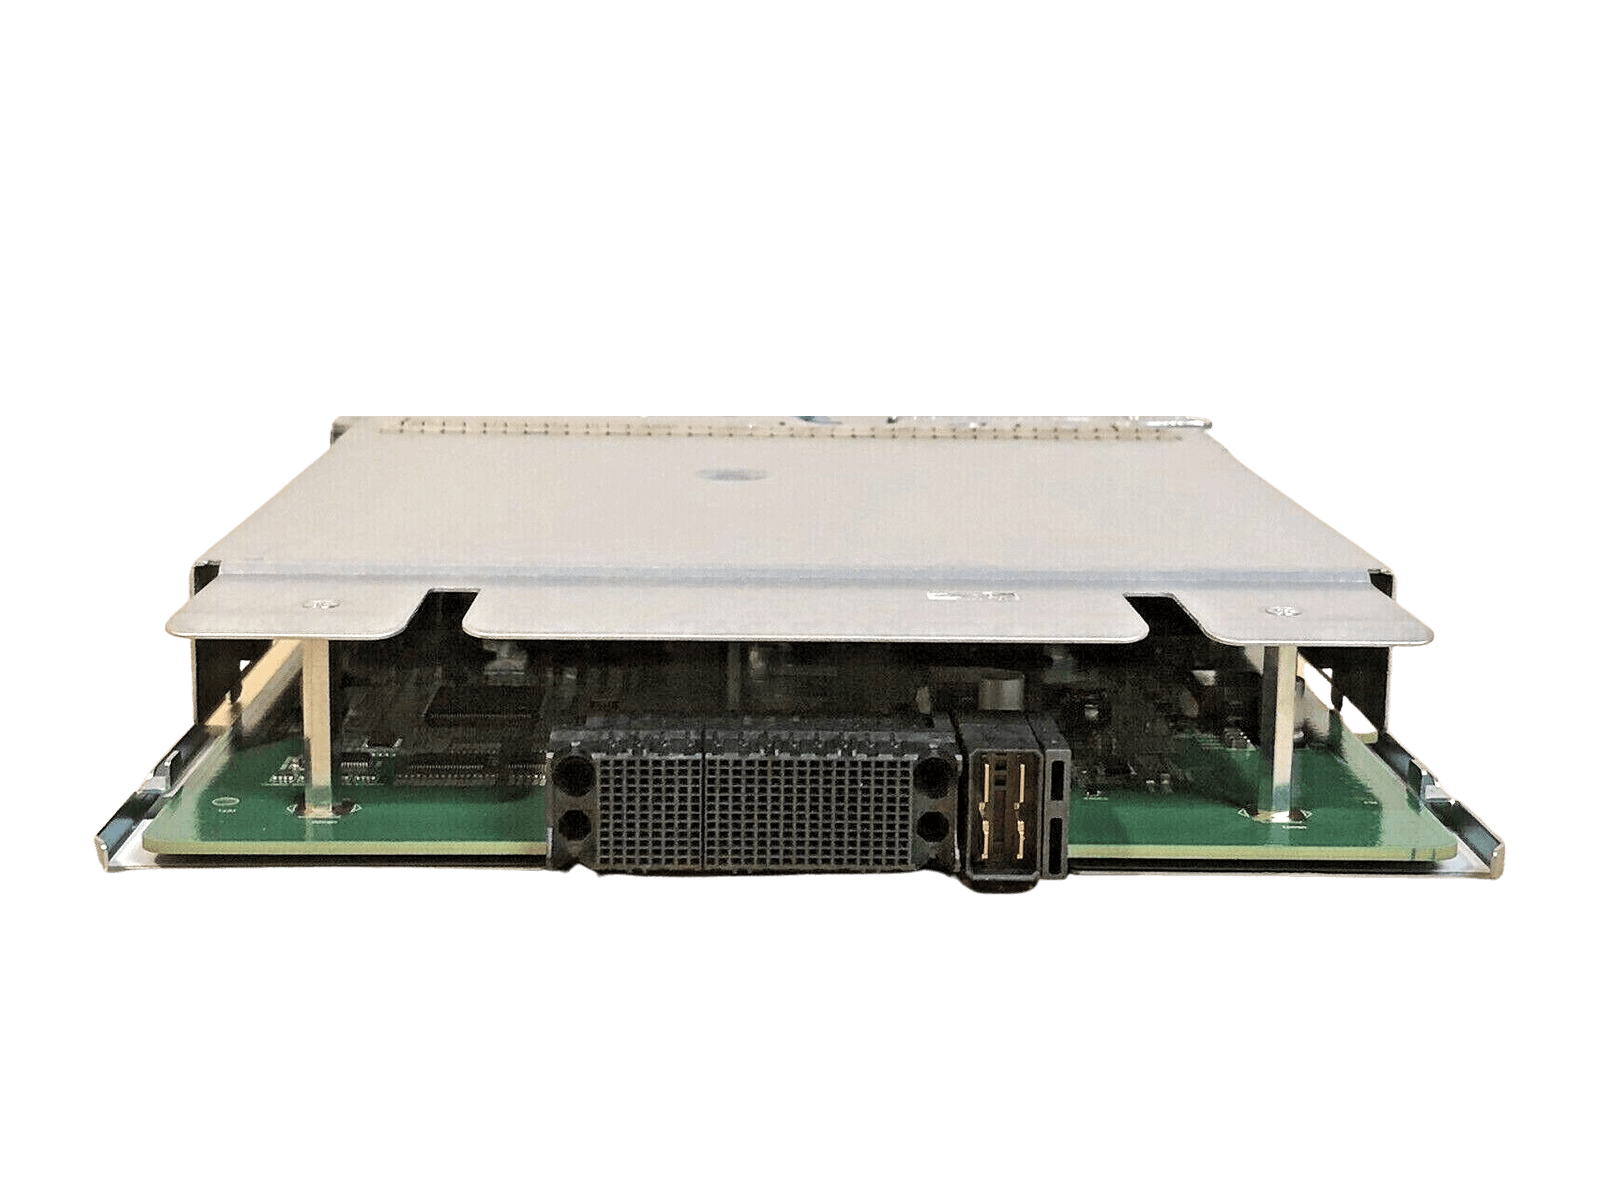 HP JH183A FlexFabric 8-Port QSFP+ Module For 2- and 4-Slot Switches 5930 5940 59x0 40GE.